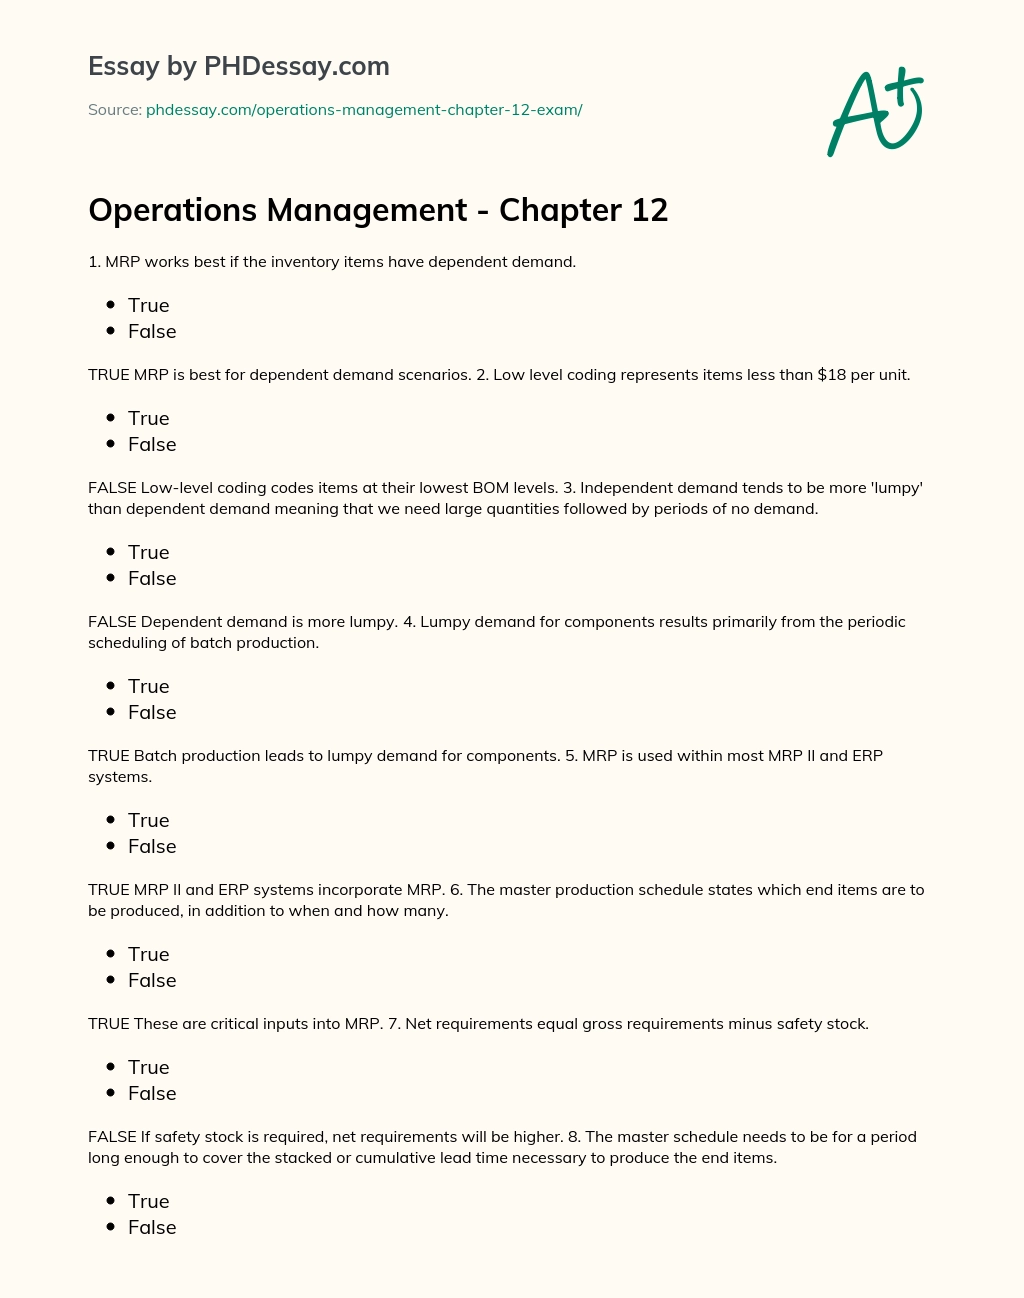 Operations Management – Chapter 12 essay